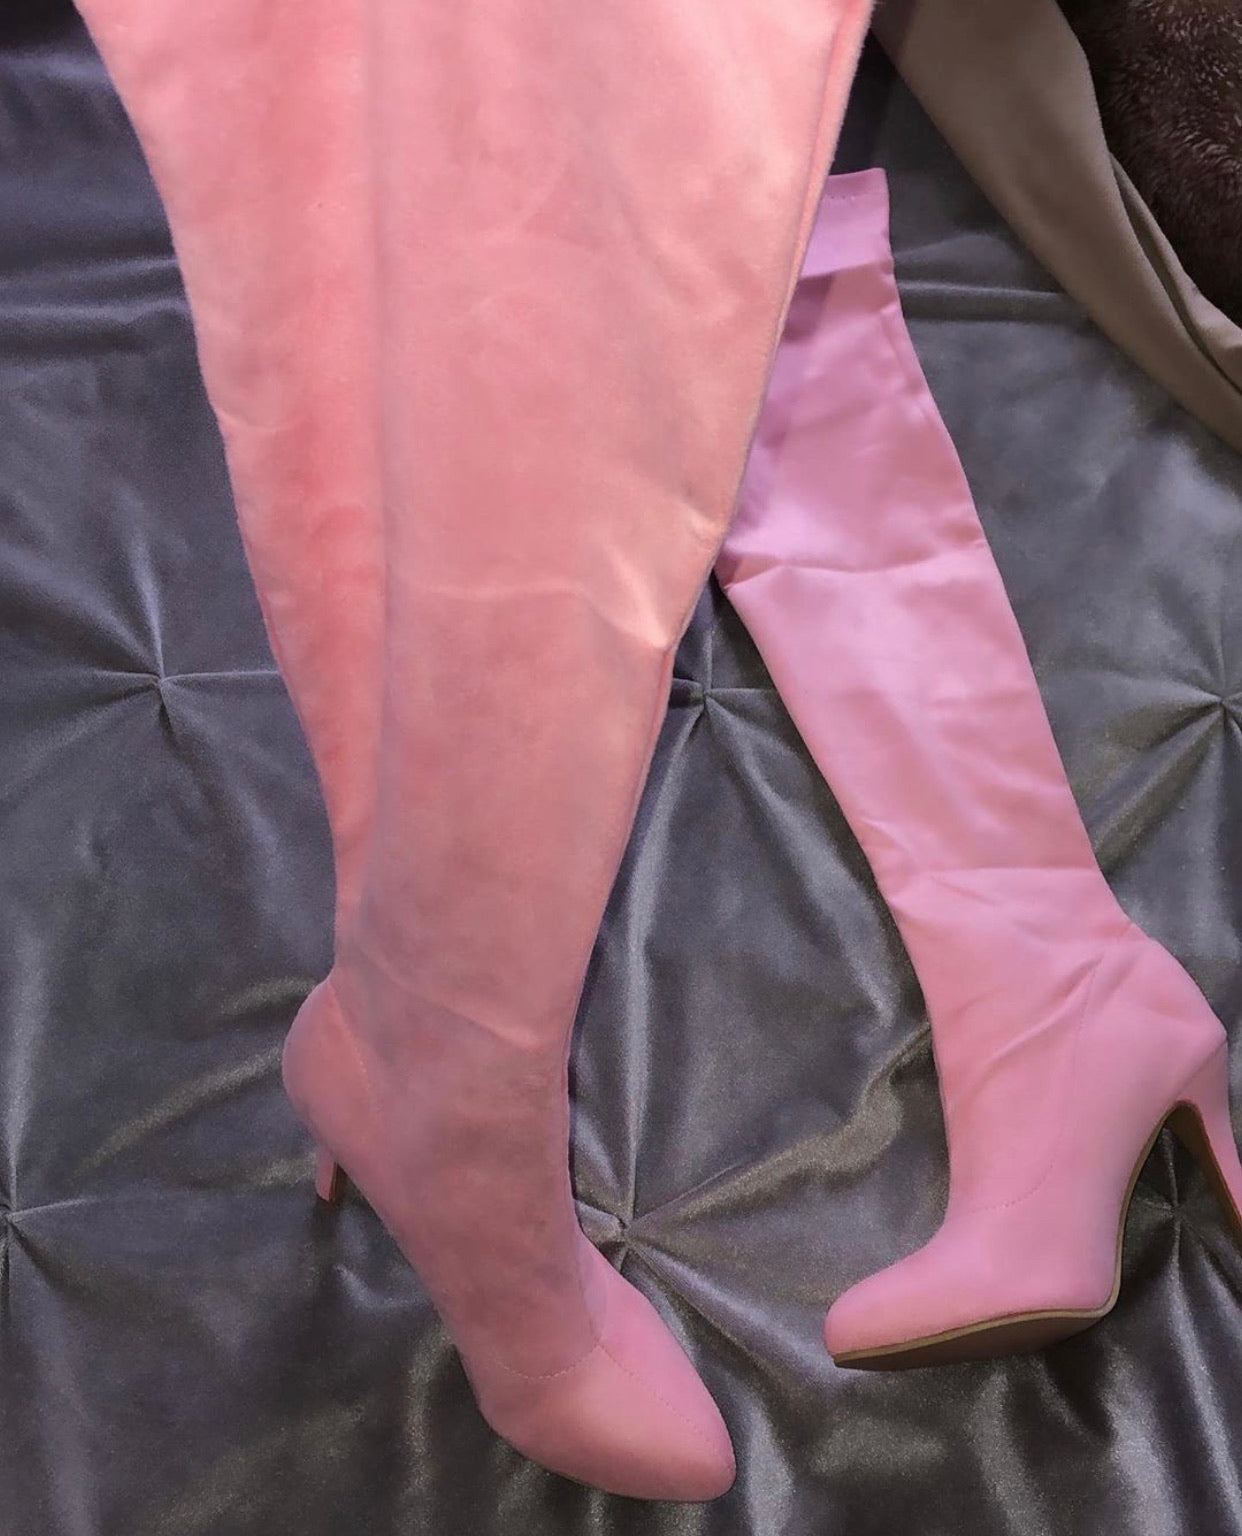 "Barbie" over the knee Boots